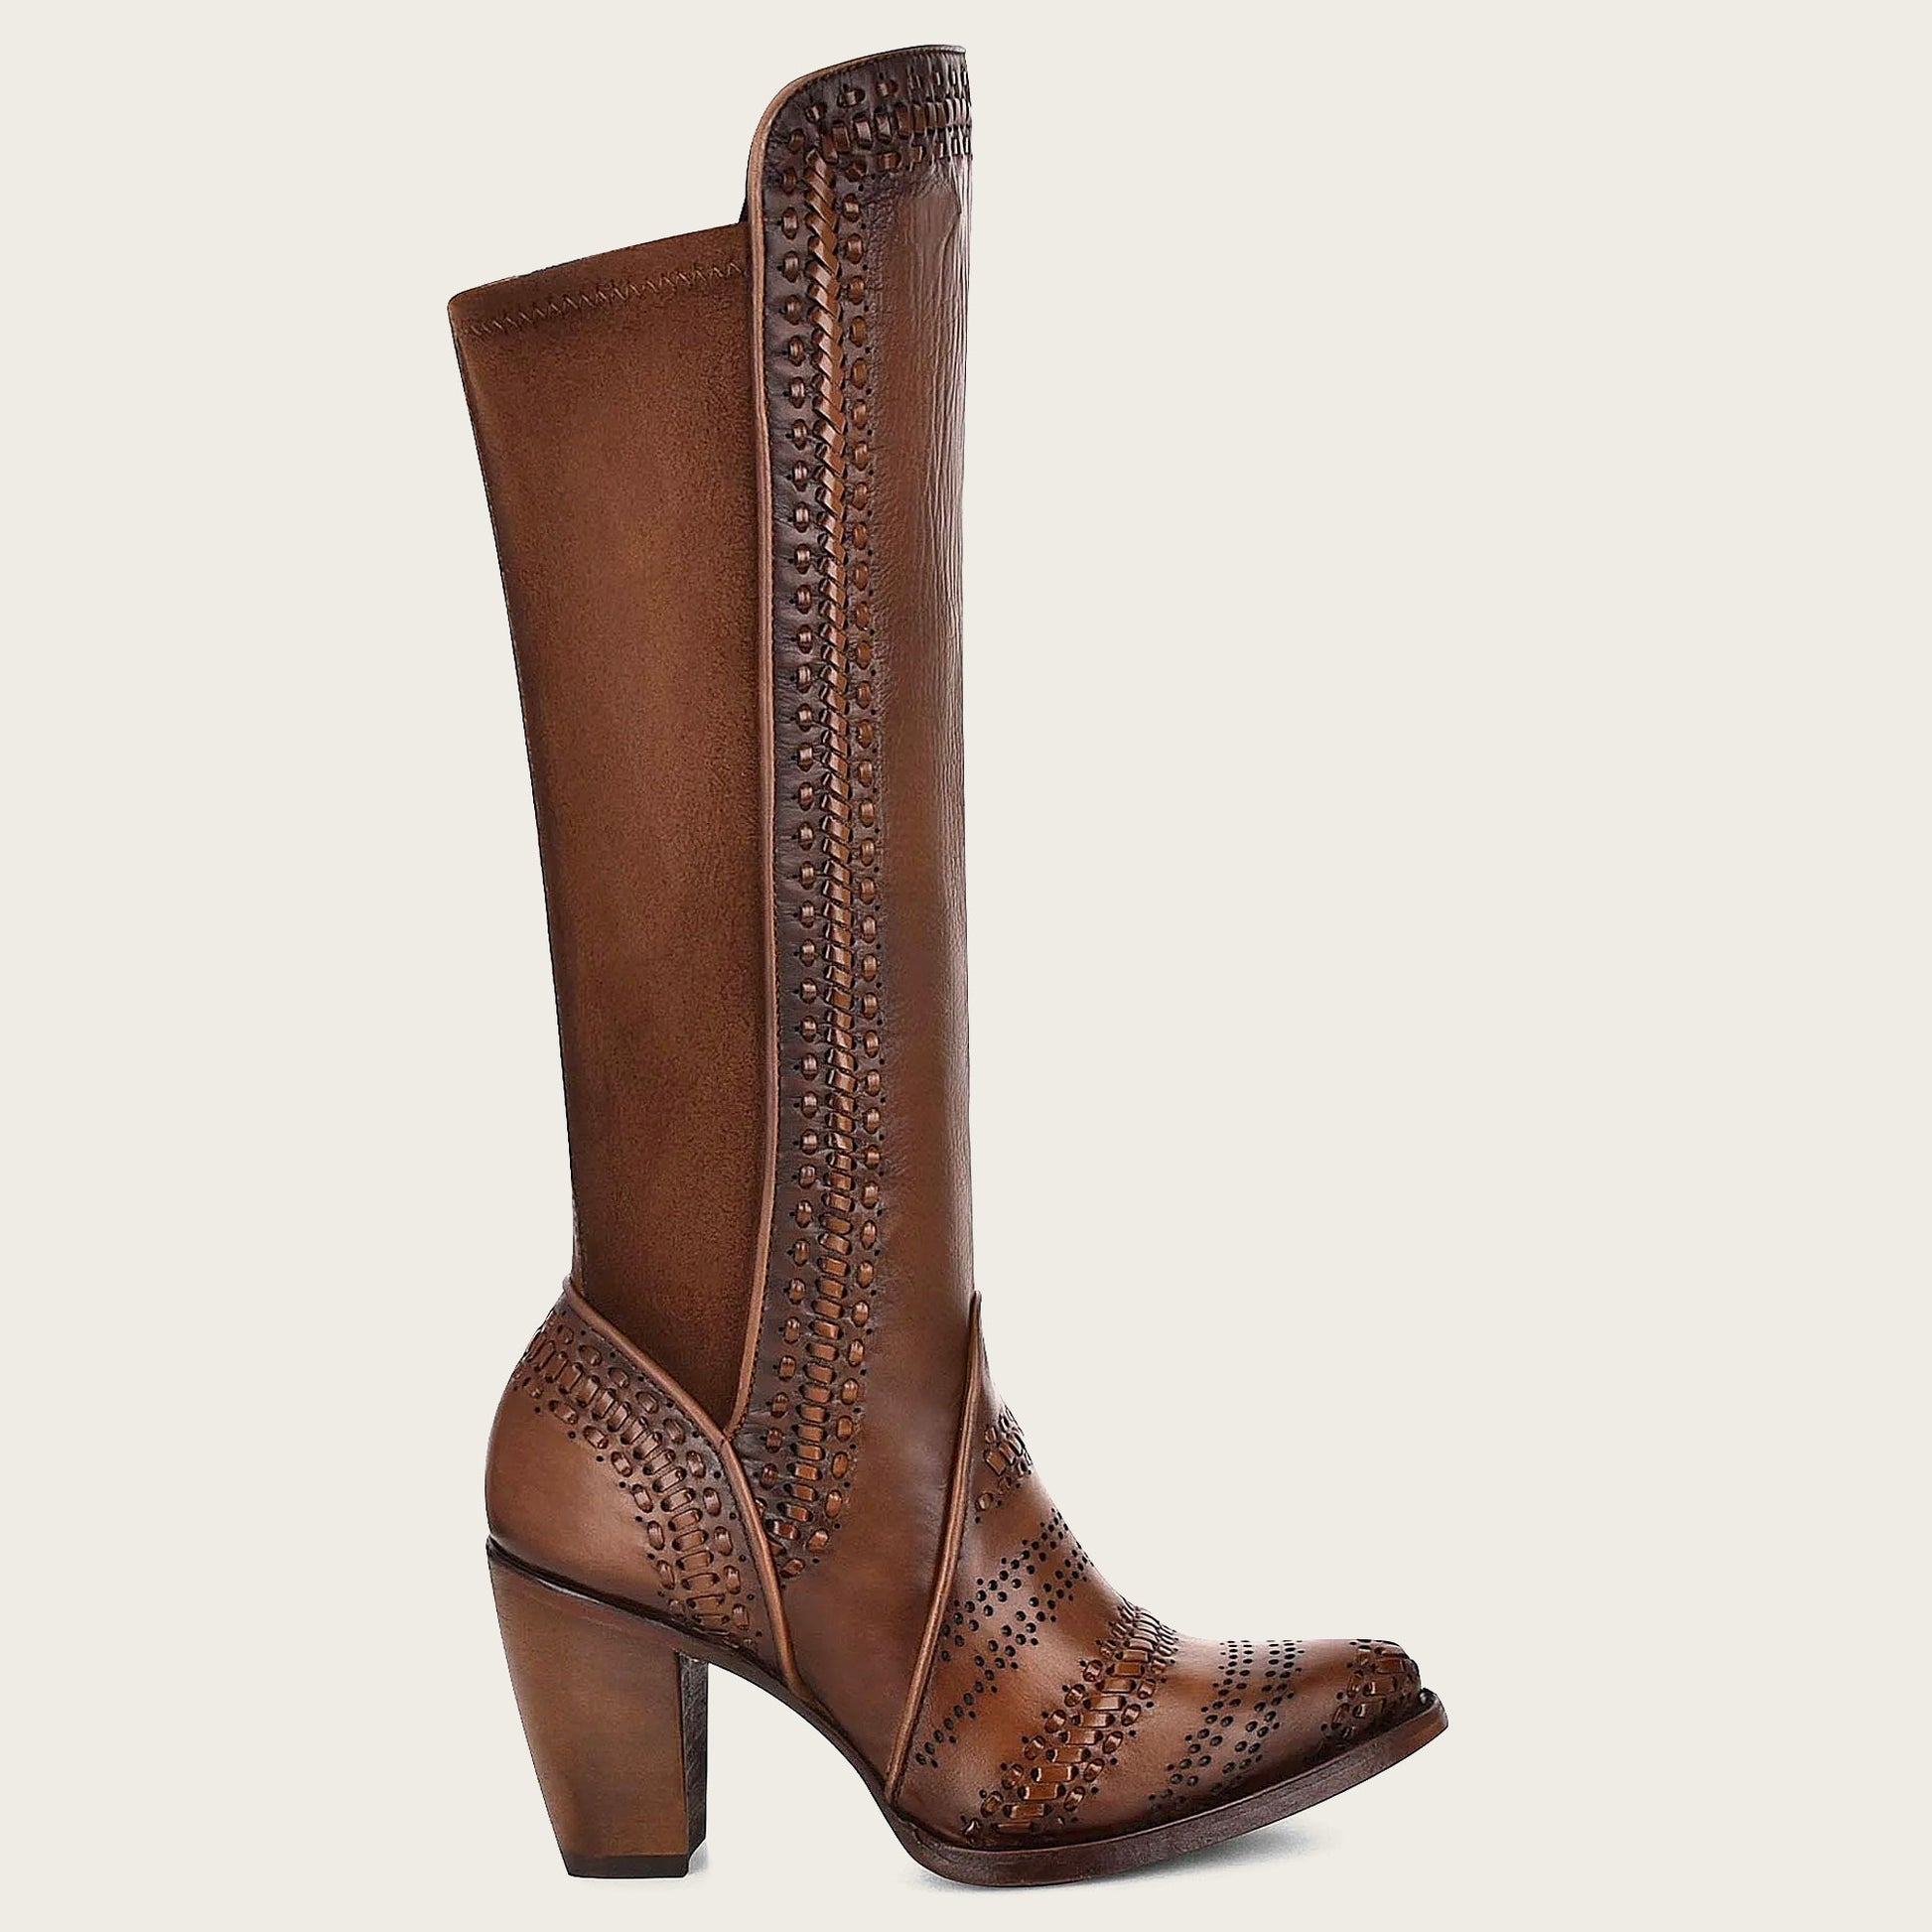 Just One Thing: A Buckle-y Pair of Boots Tops Fall's Must-Shop